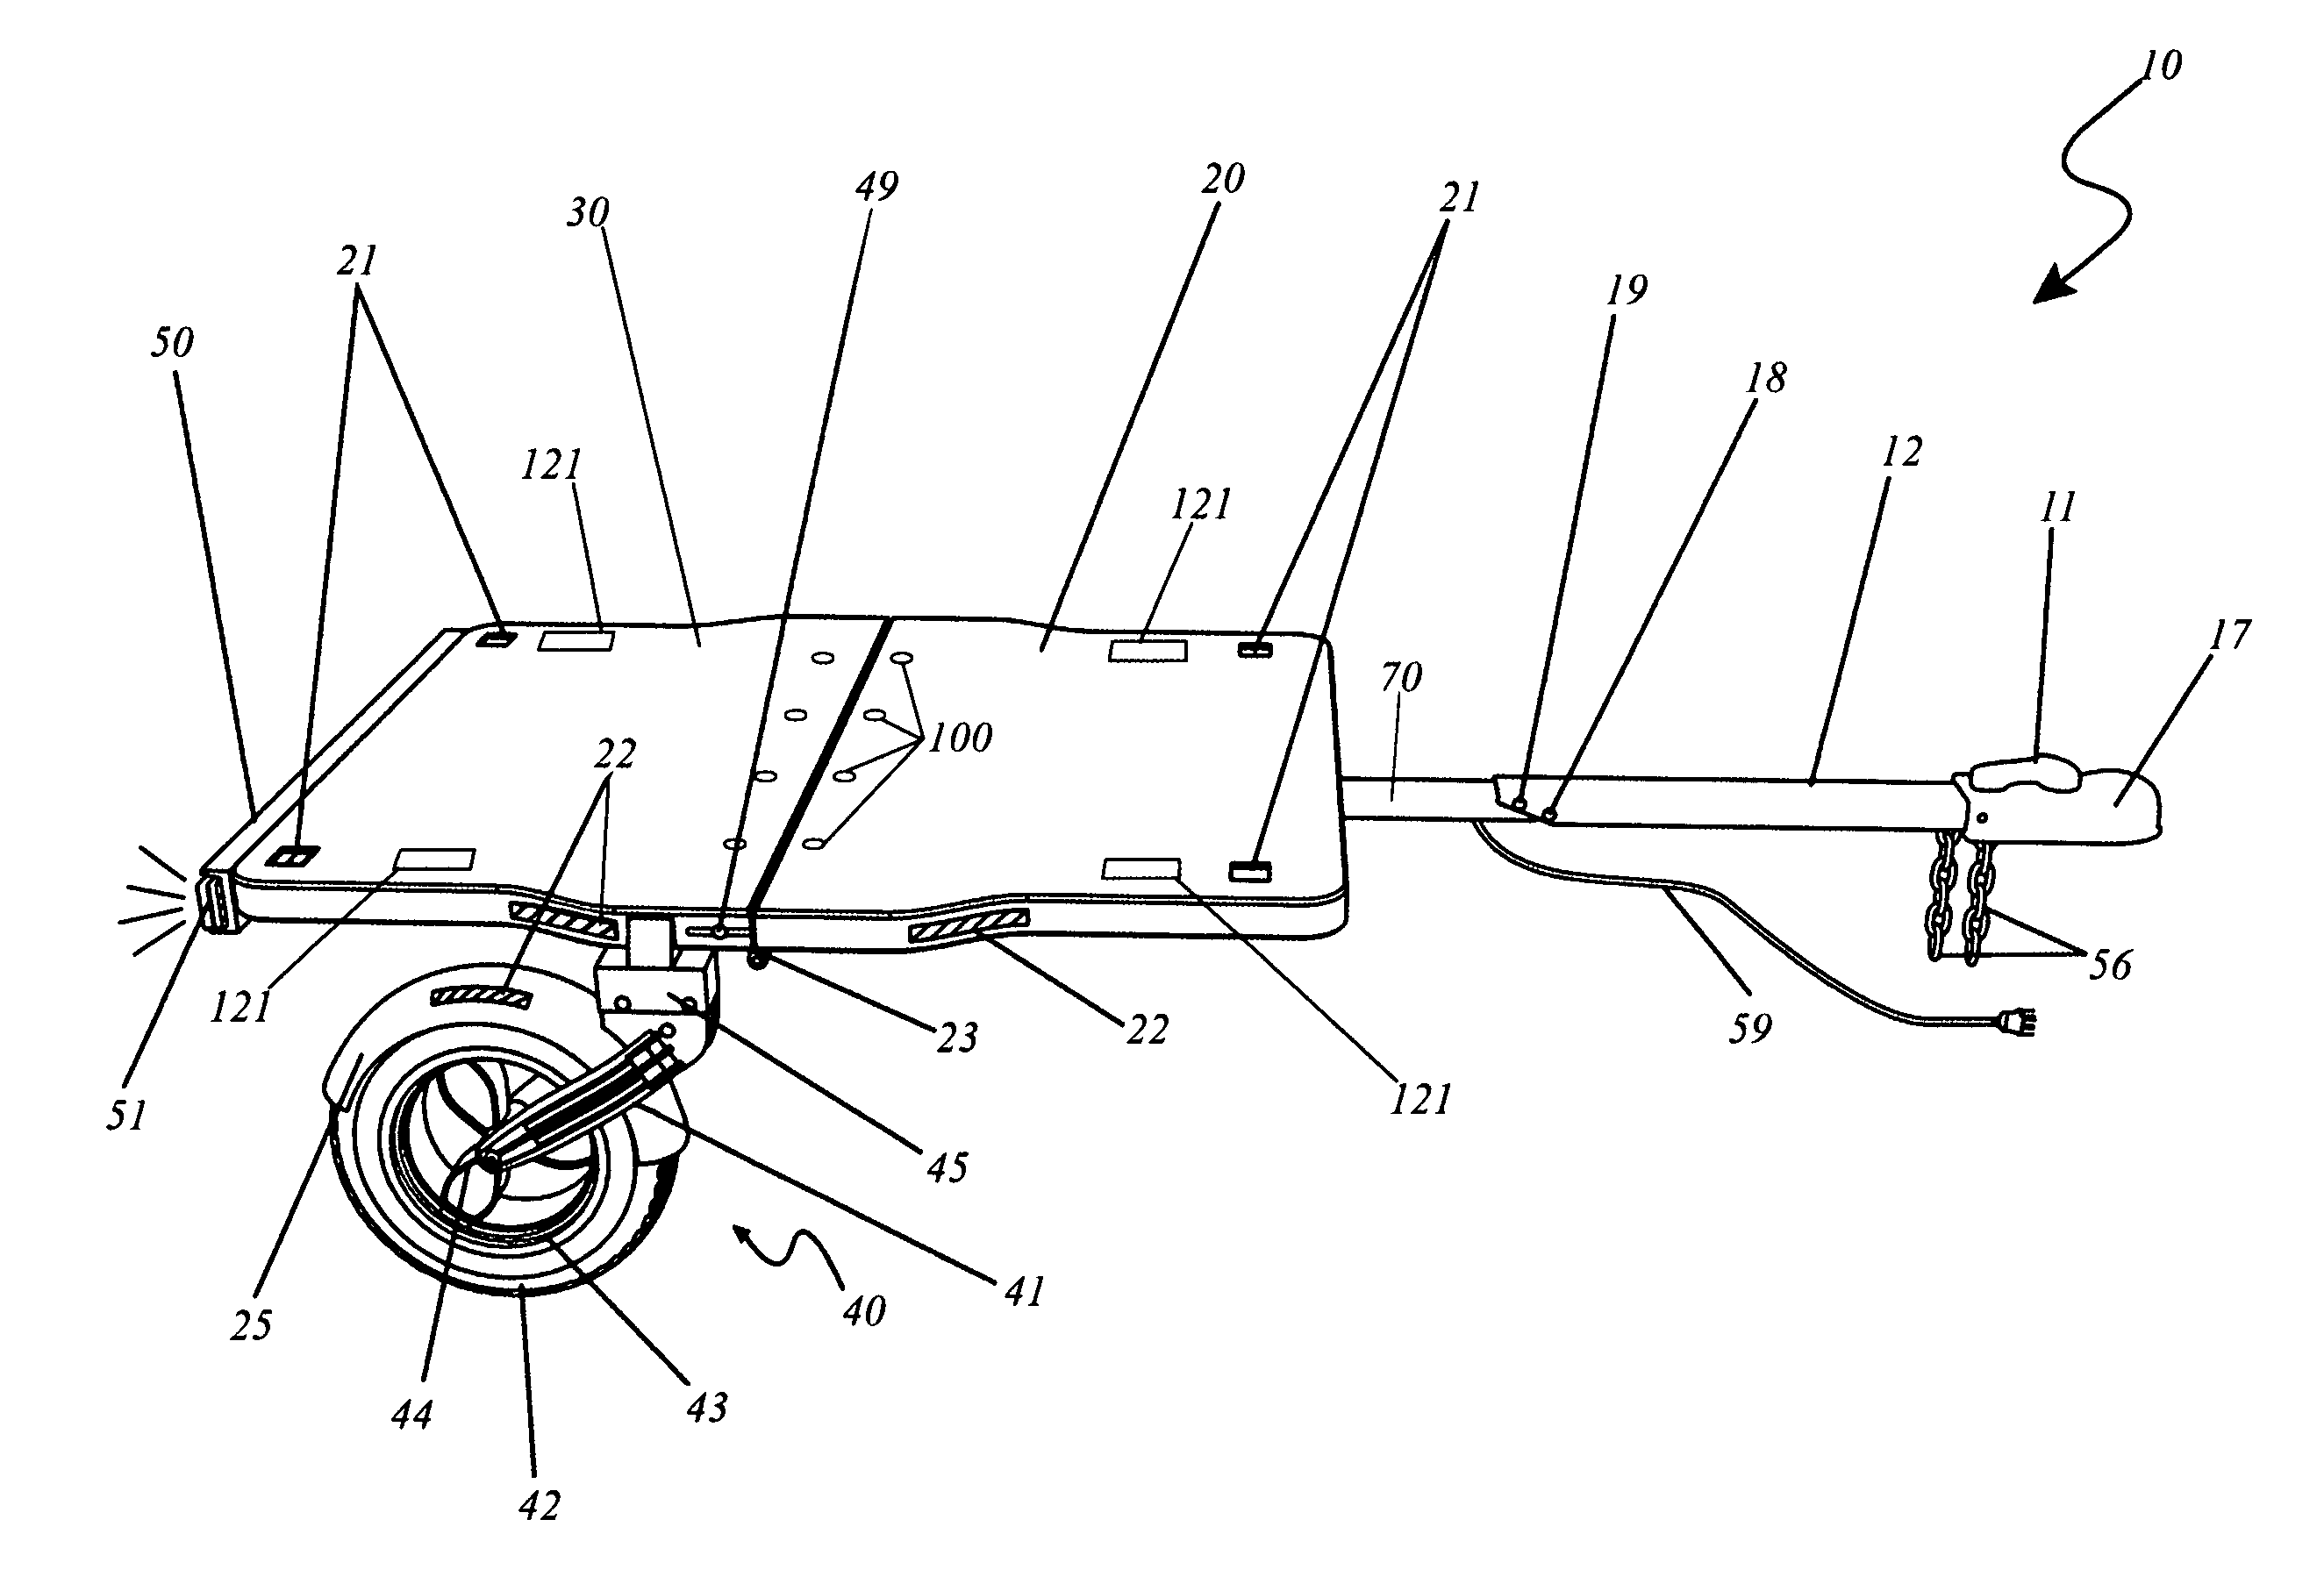 Portable and adjustable trailer assembly and method of use thereof